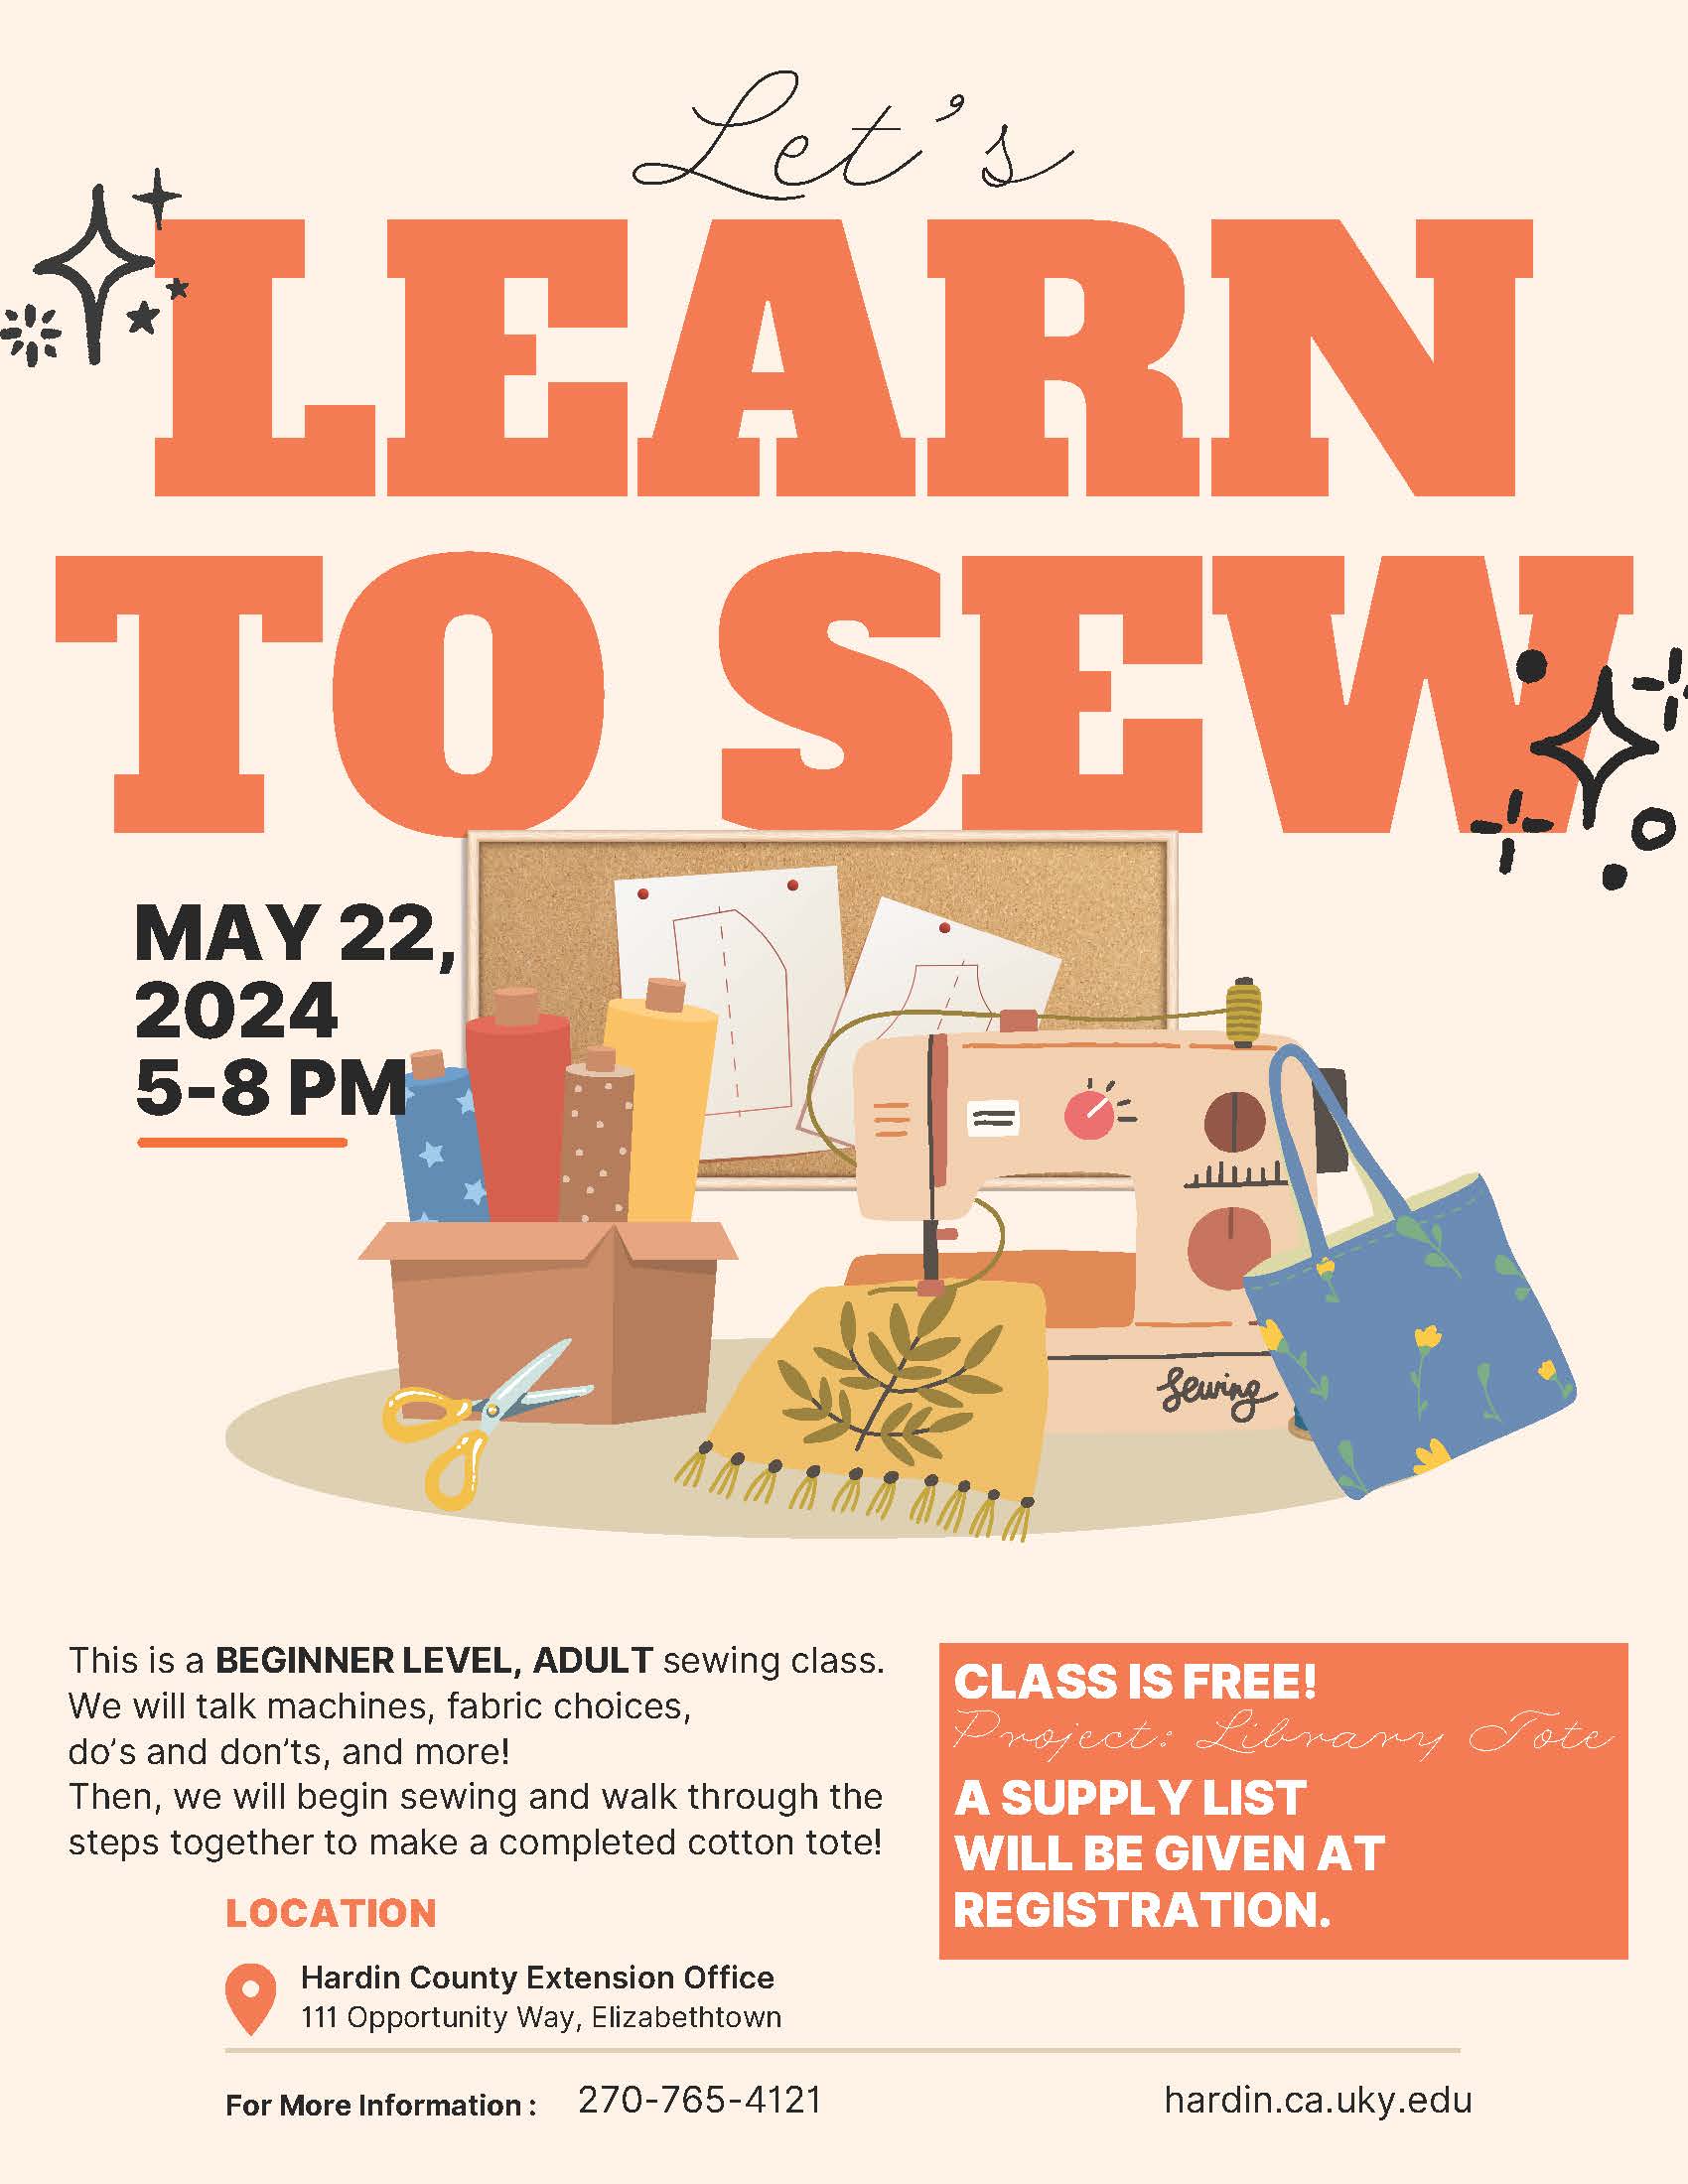 This a BEGINNER LEVEL, Adult sewing class.